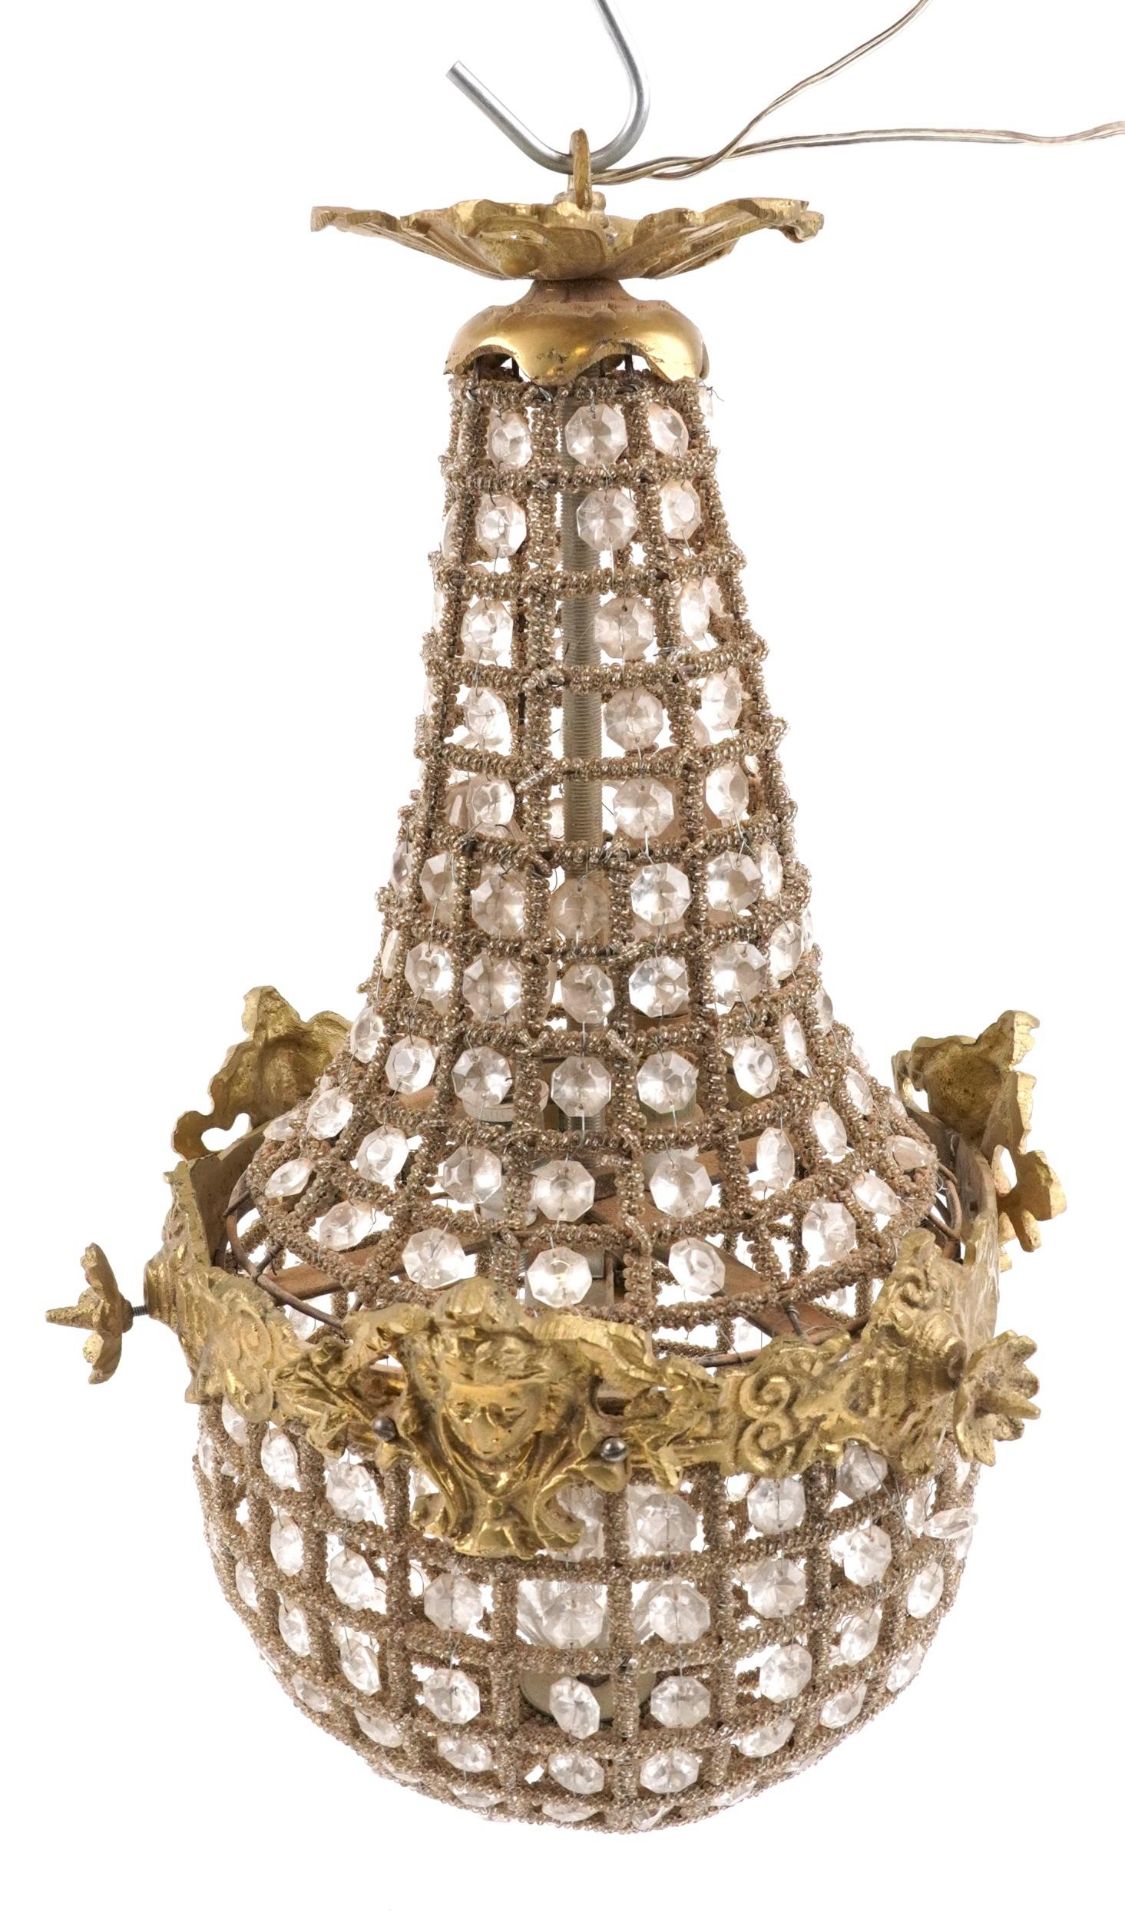 French style chandelier with ornate gilt metal mounts, 44cm high : For further information on this